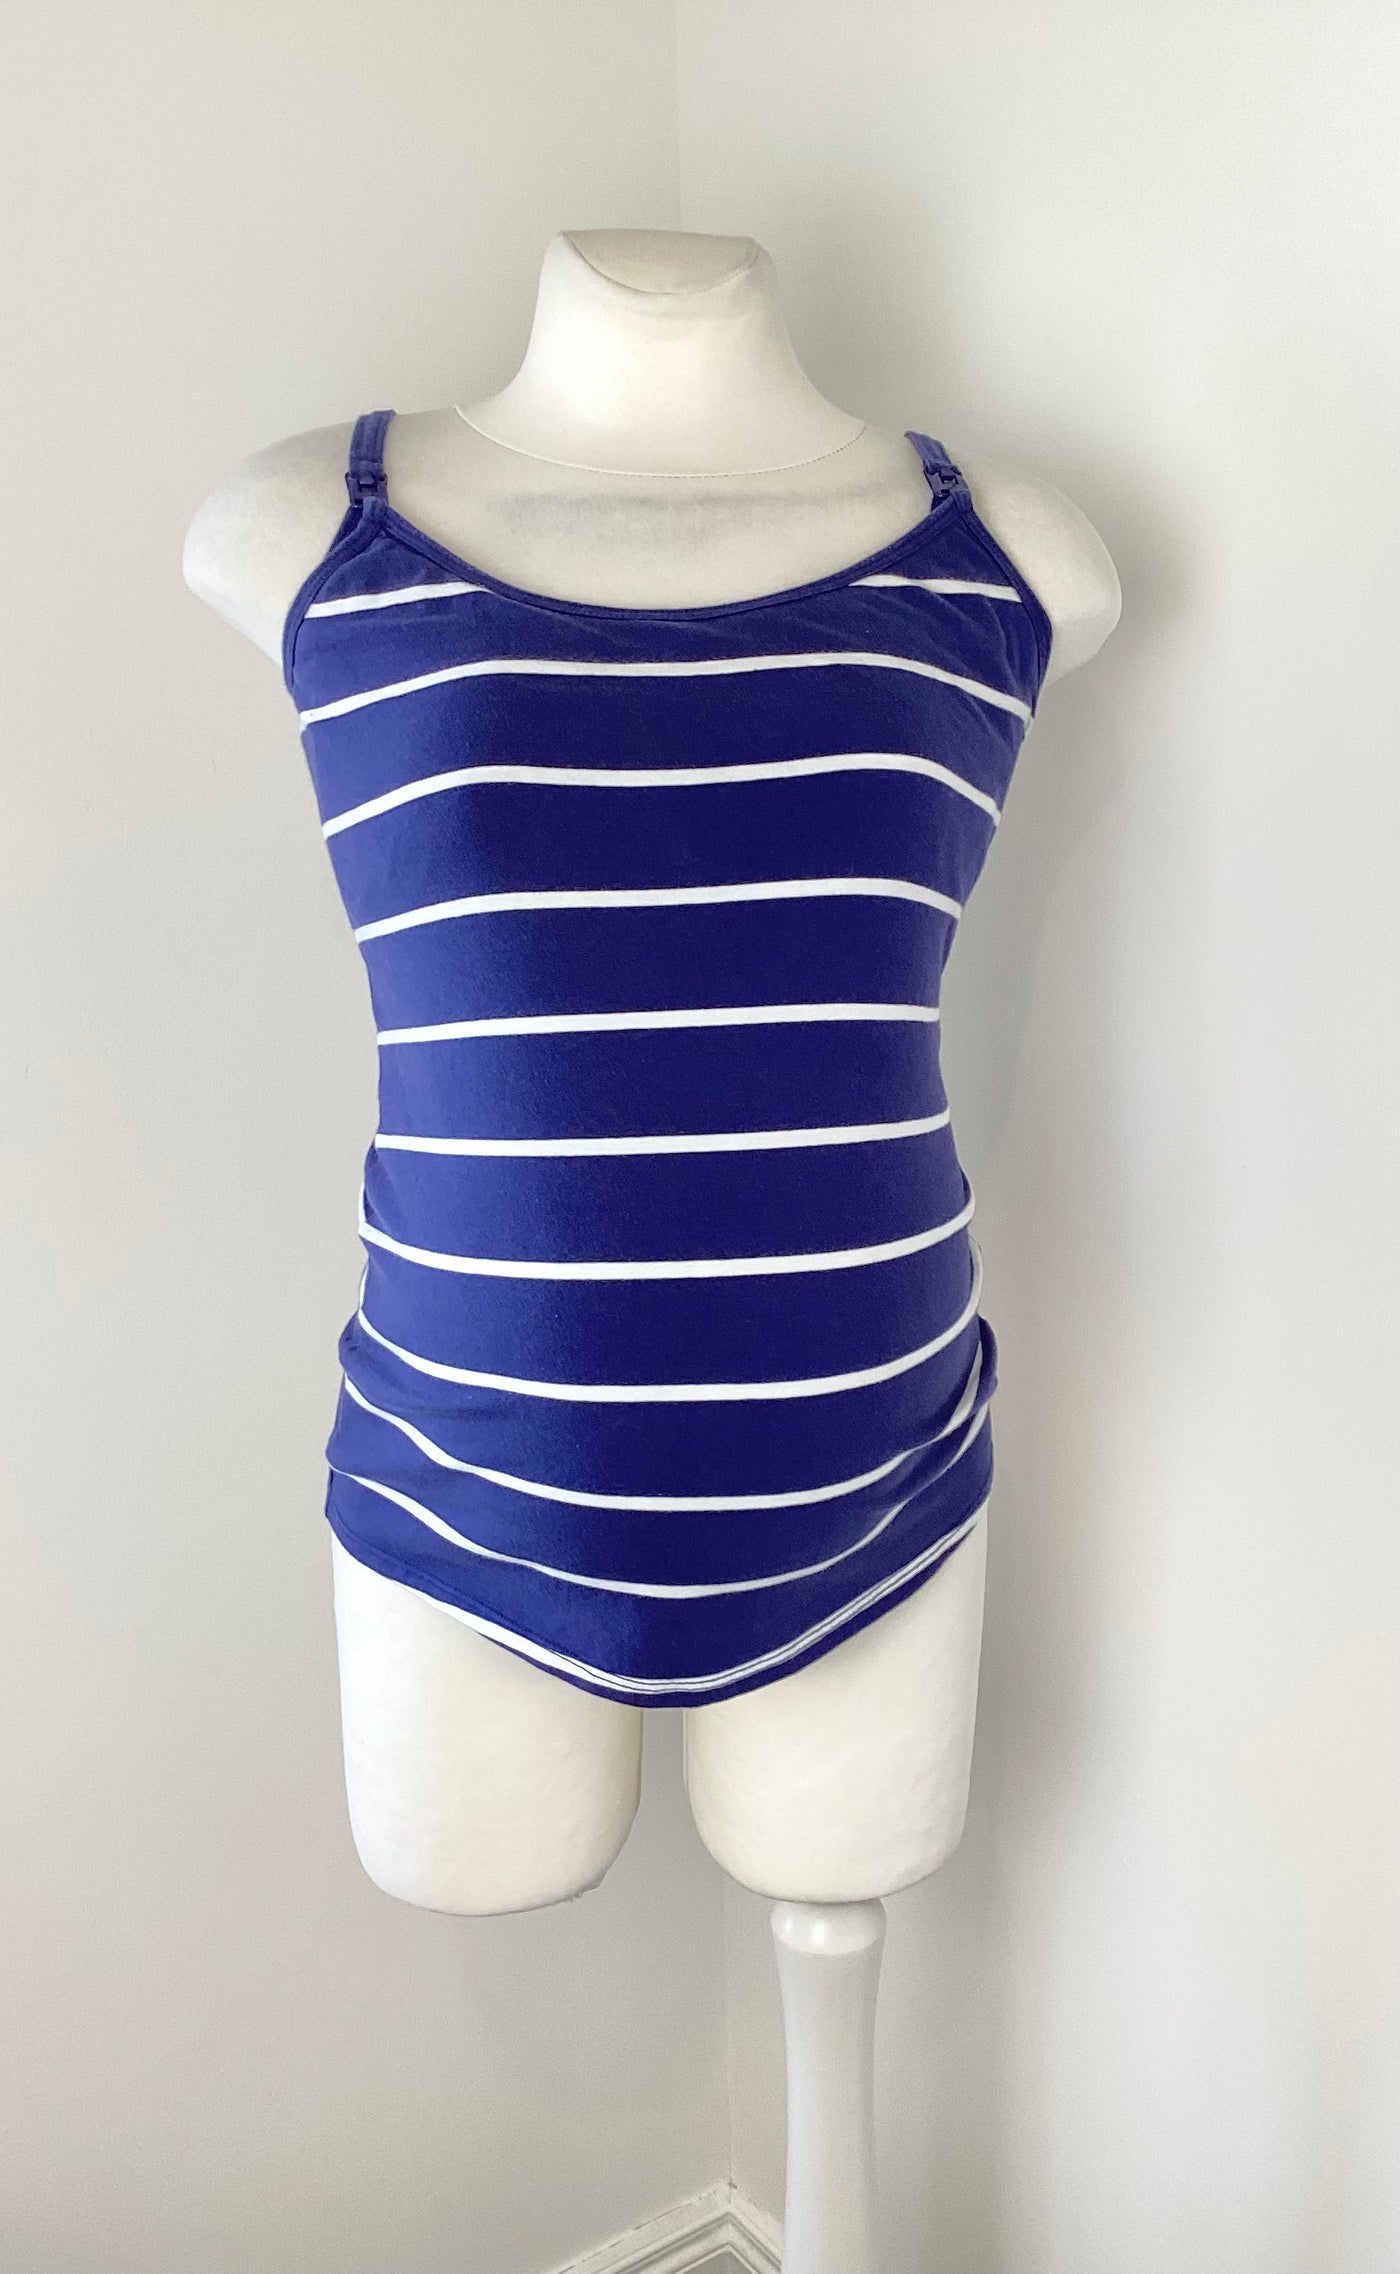 George Maternity navy & white striped camisole nursing top - Size 10